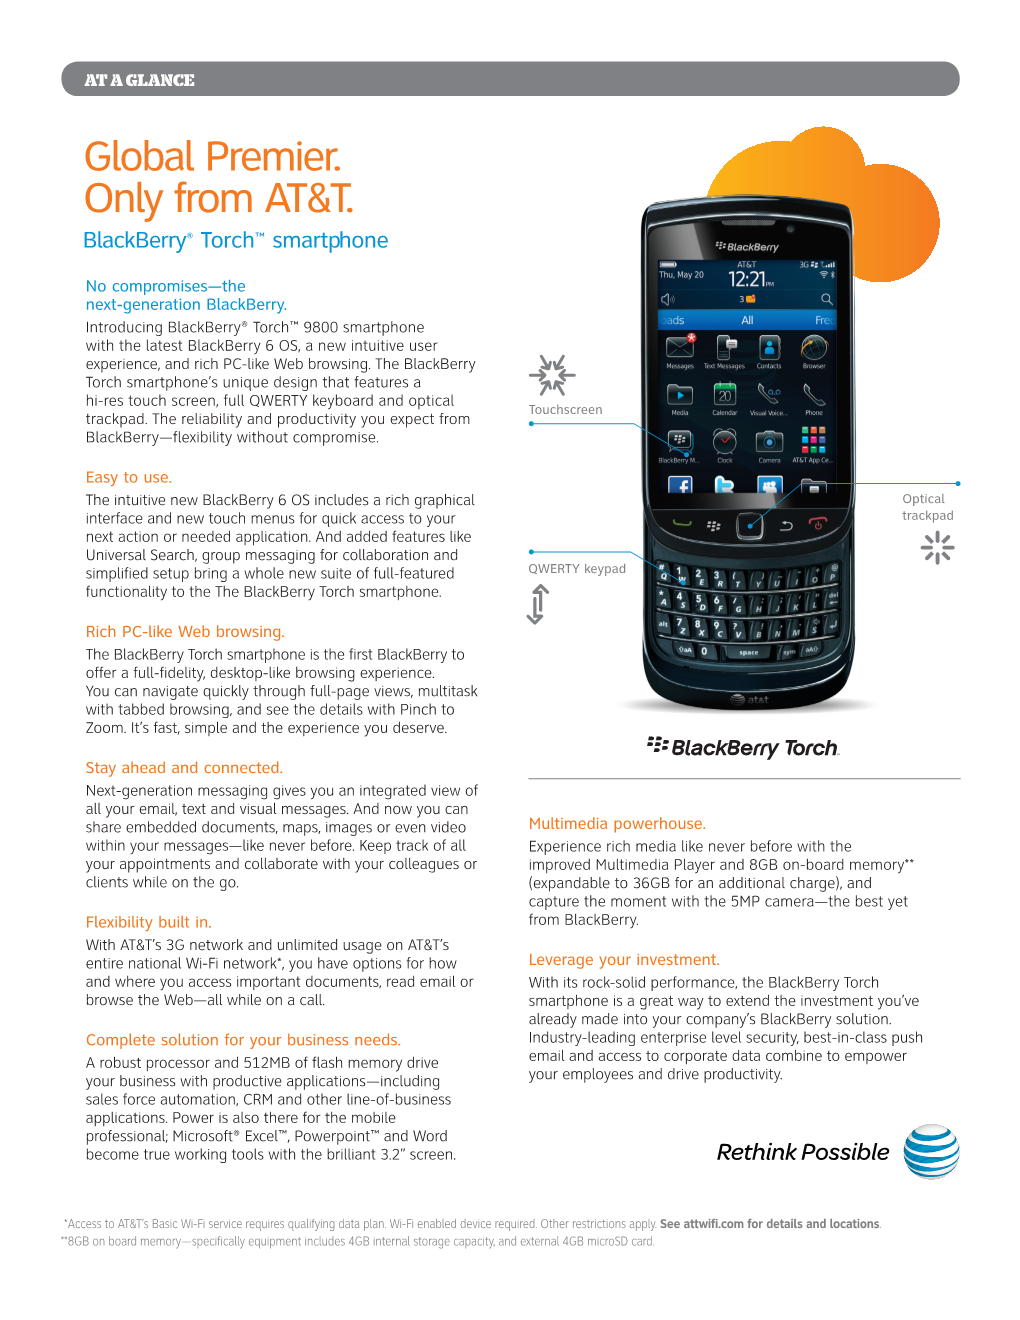 Global Premier. Only from AT&T